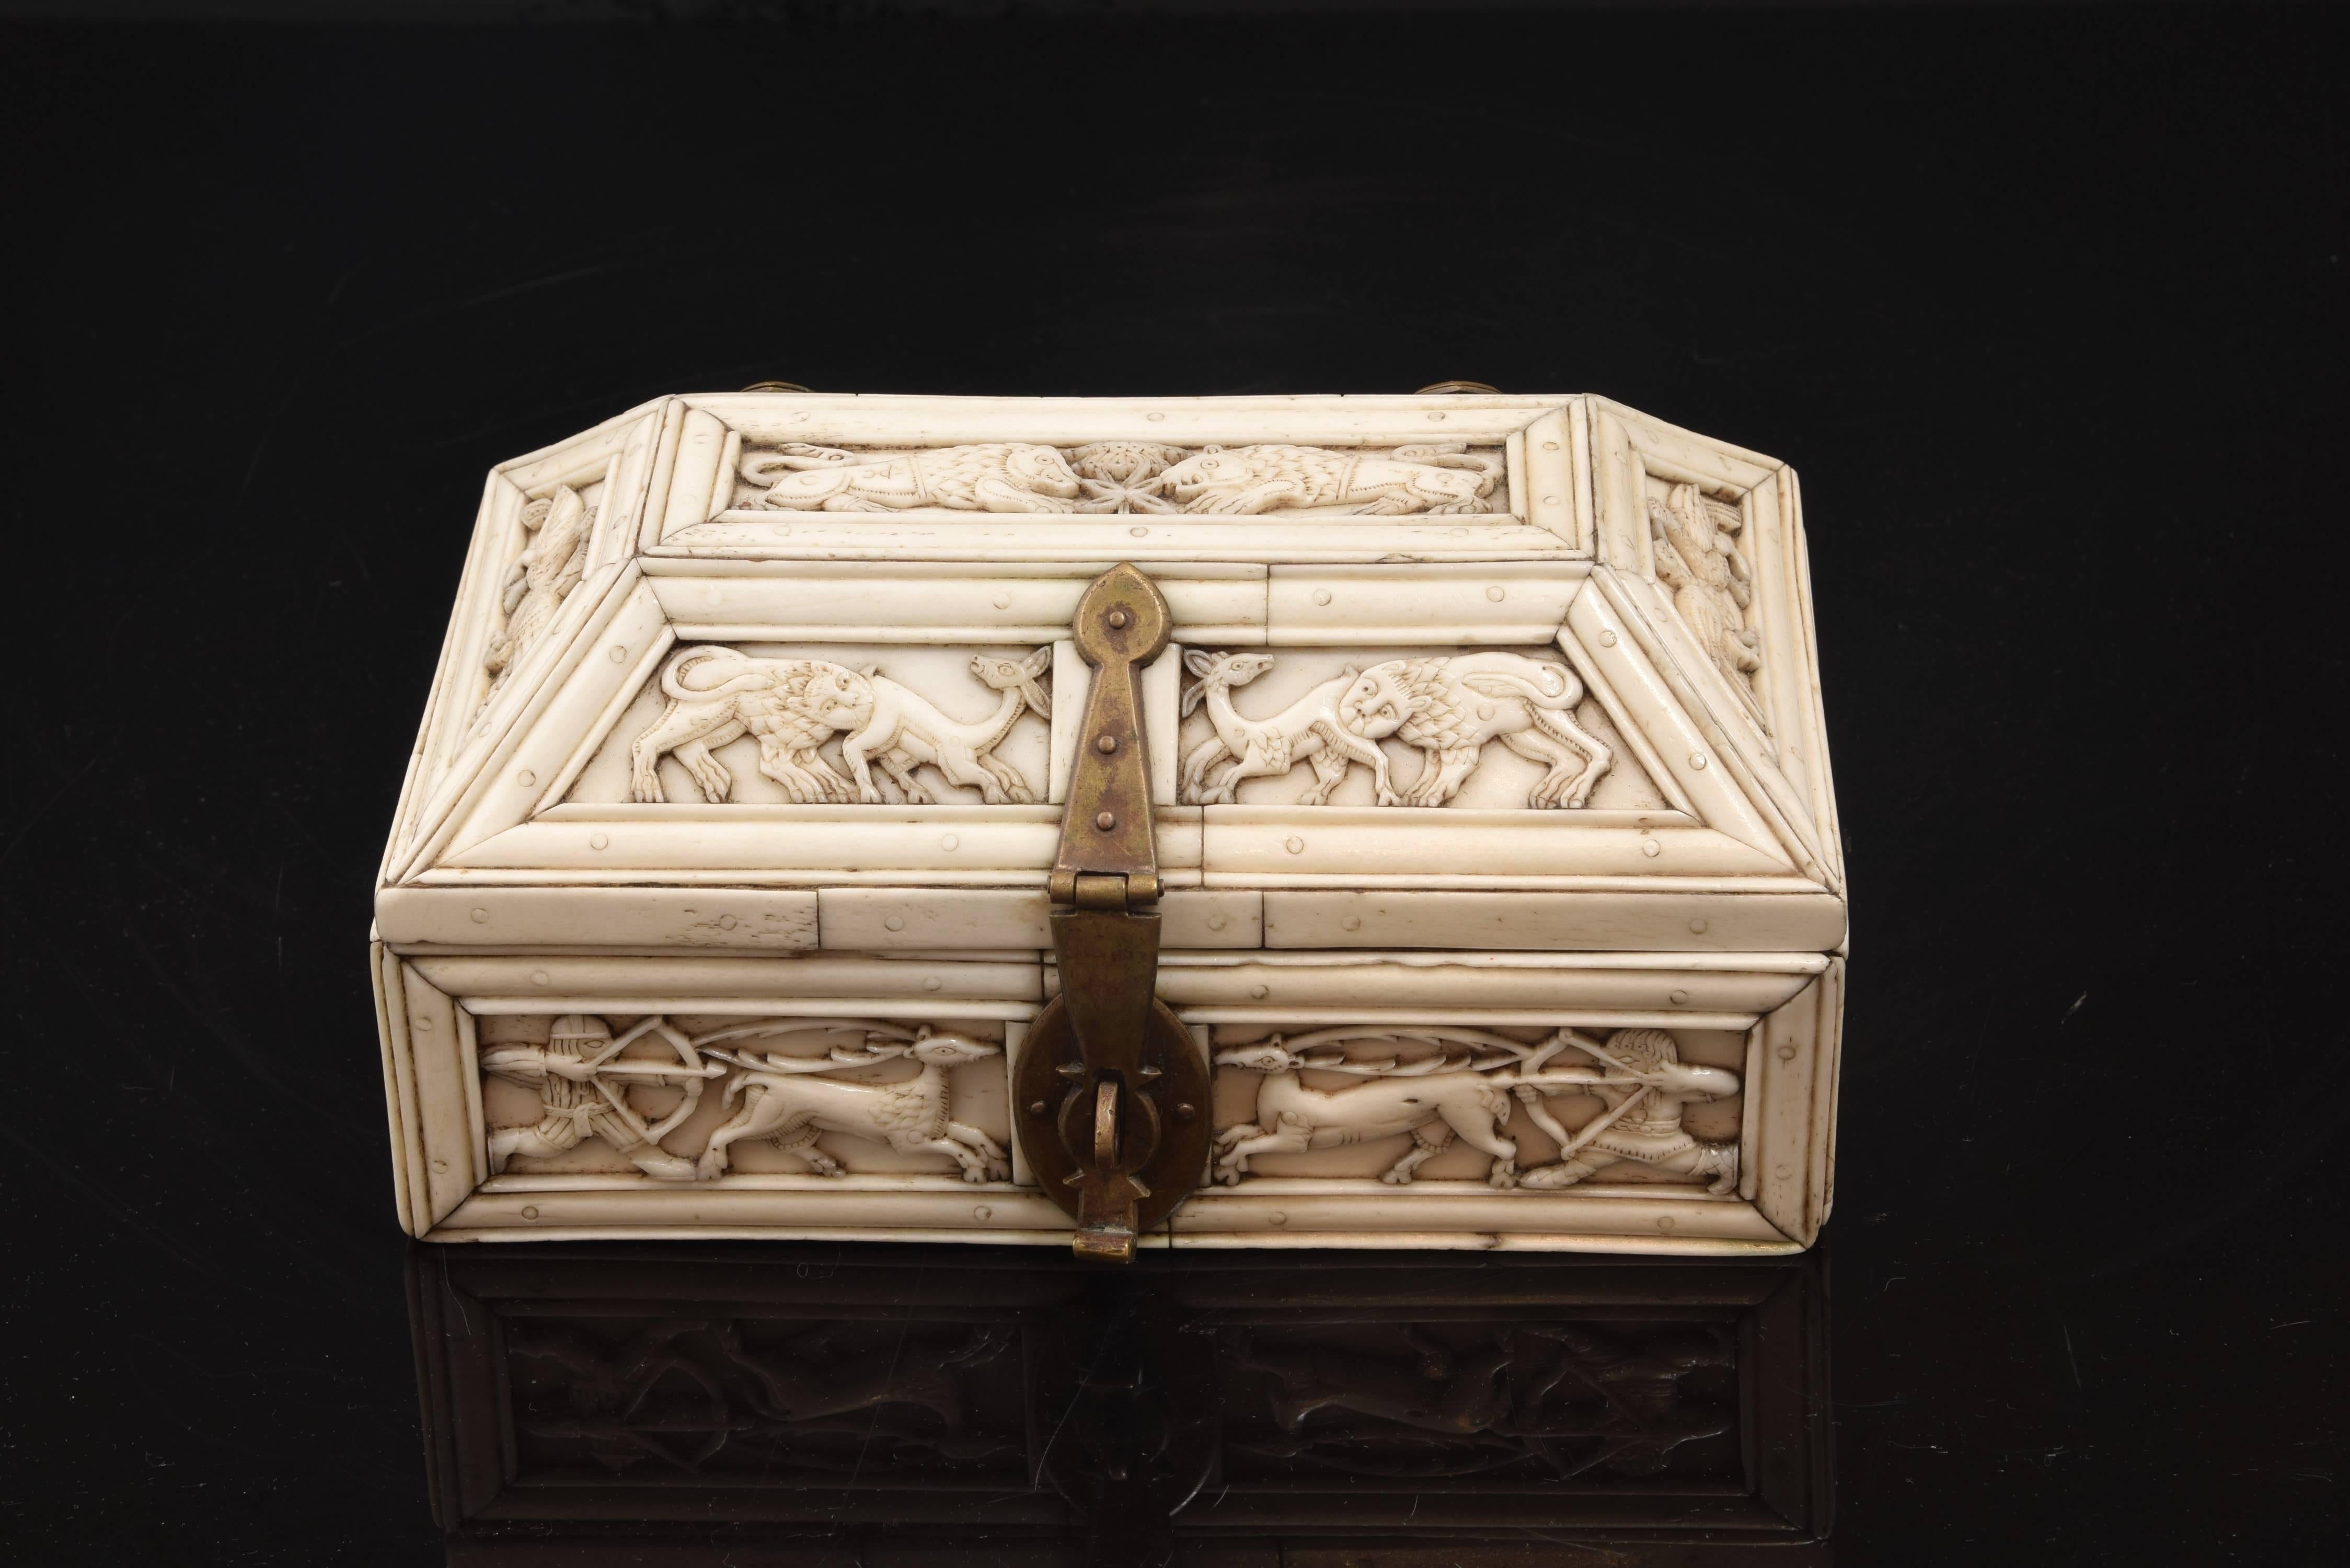 Neo-Romanesque chest. Carved bone. 20th century.
Carved bone casket with rectangular base and lid in the shape of a trough, which has a series of metal fittings on the outside. Both the type of the piece, as the form, the decoration (animals